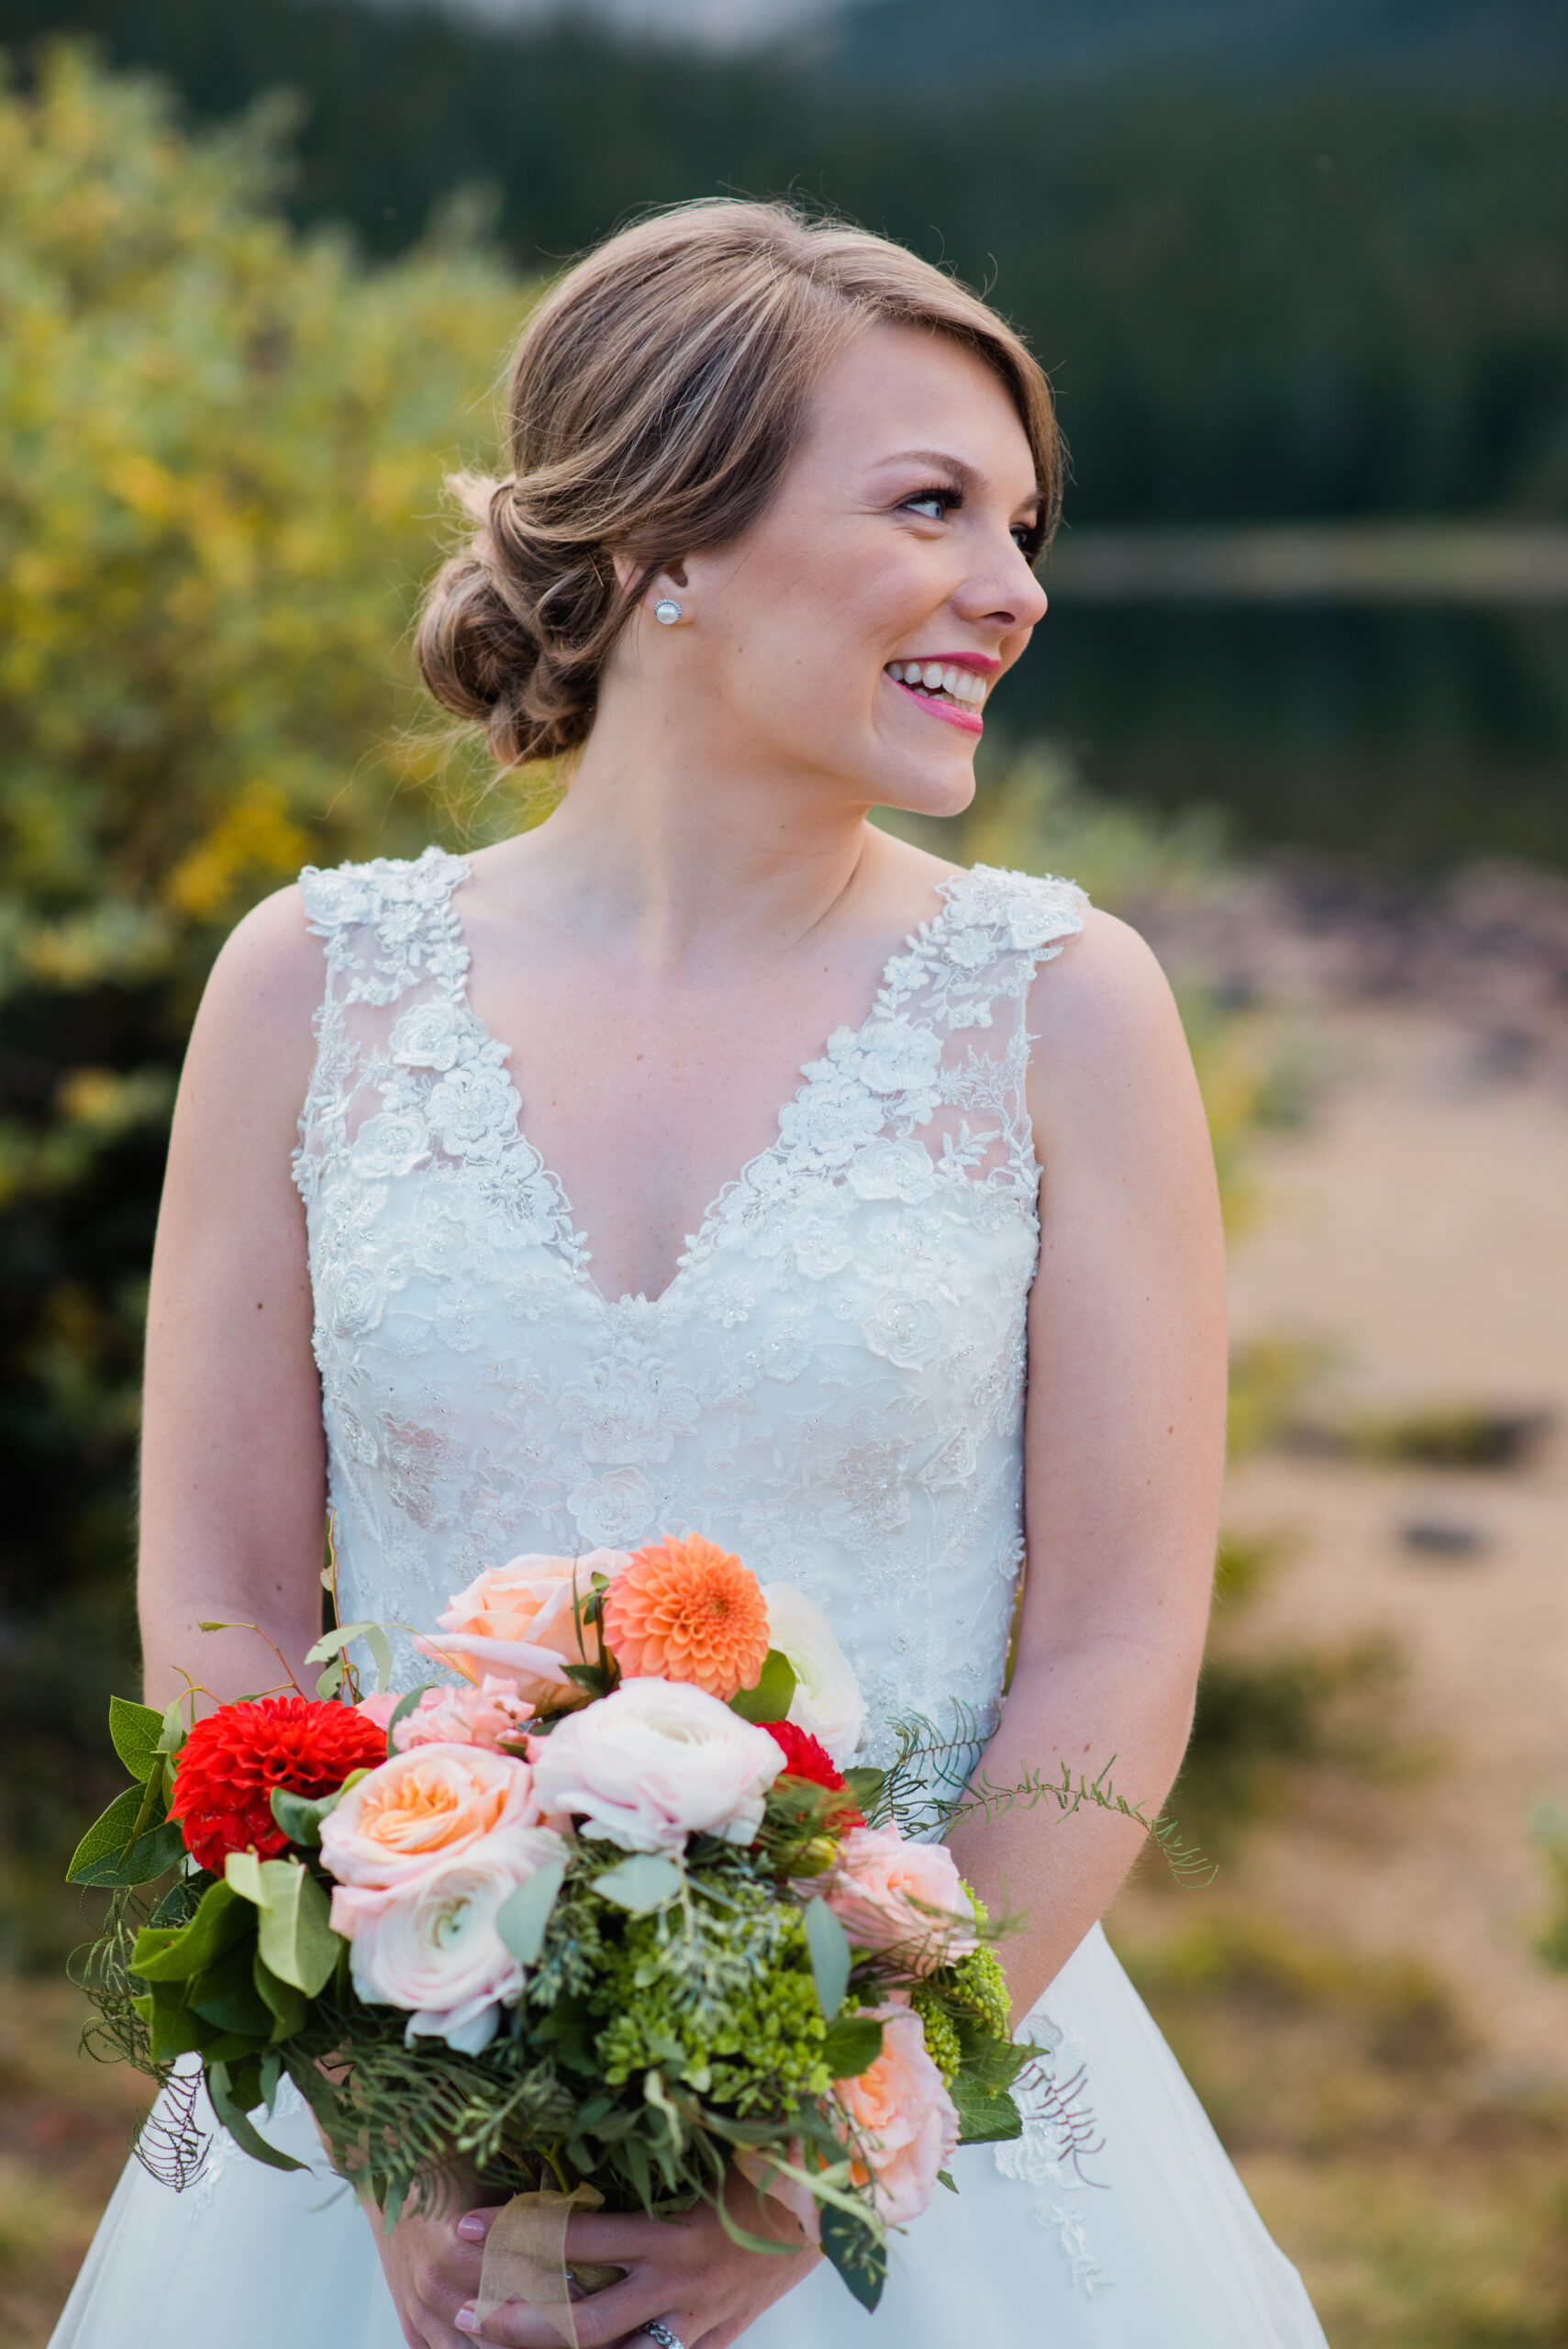 bride in lace wedding gown by the lake holding flowers